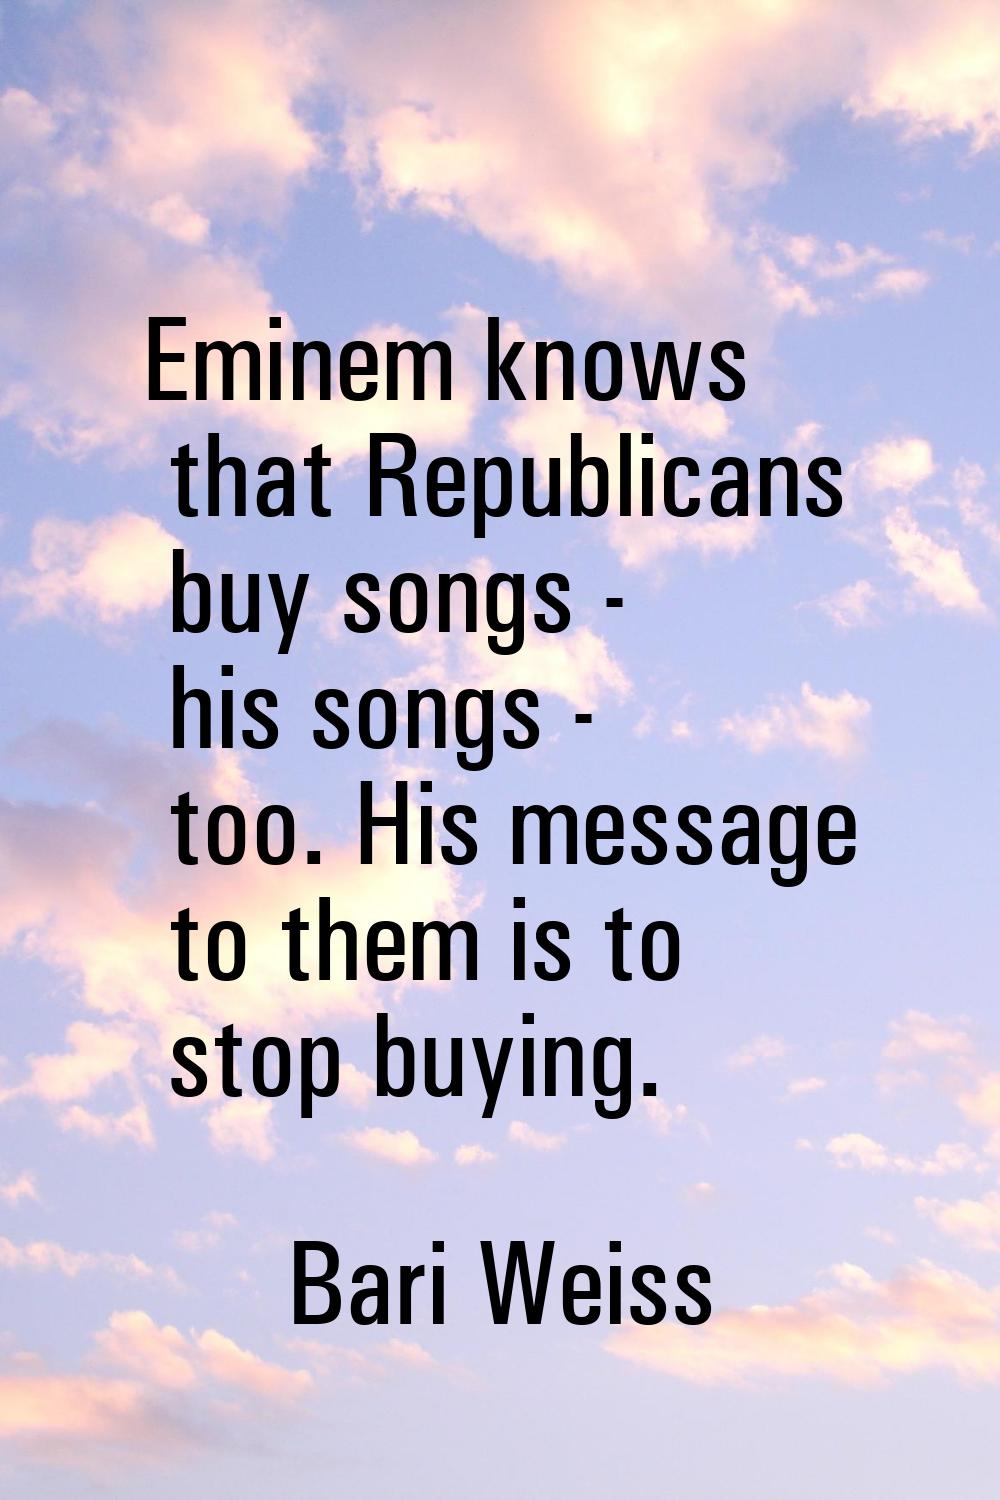 Eminem knows that Republicans buy songs - his songs - too. His message to them is to stop buying.